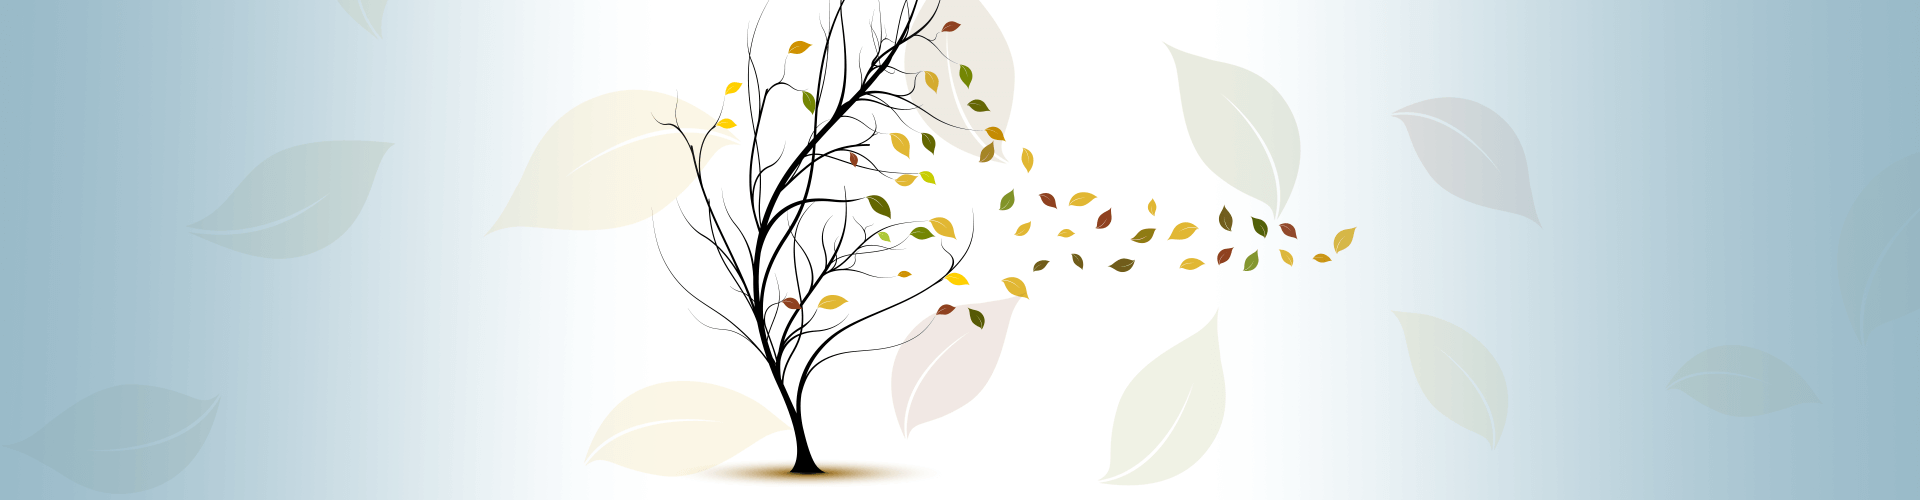 Tree with leaves falling